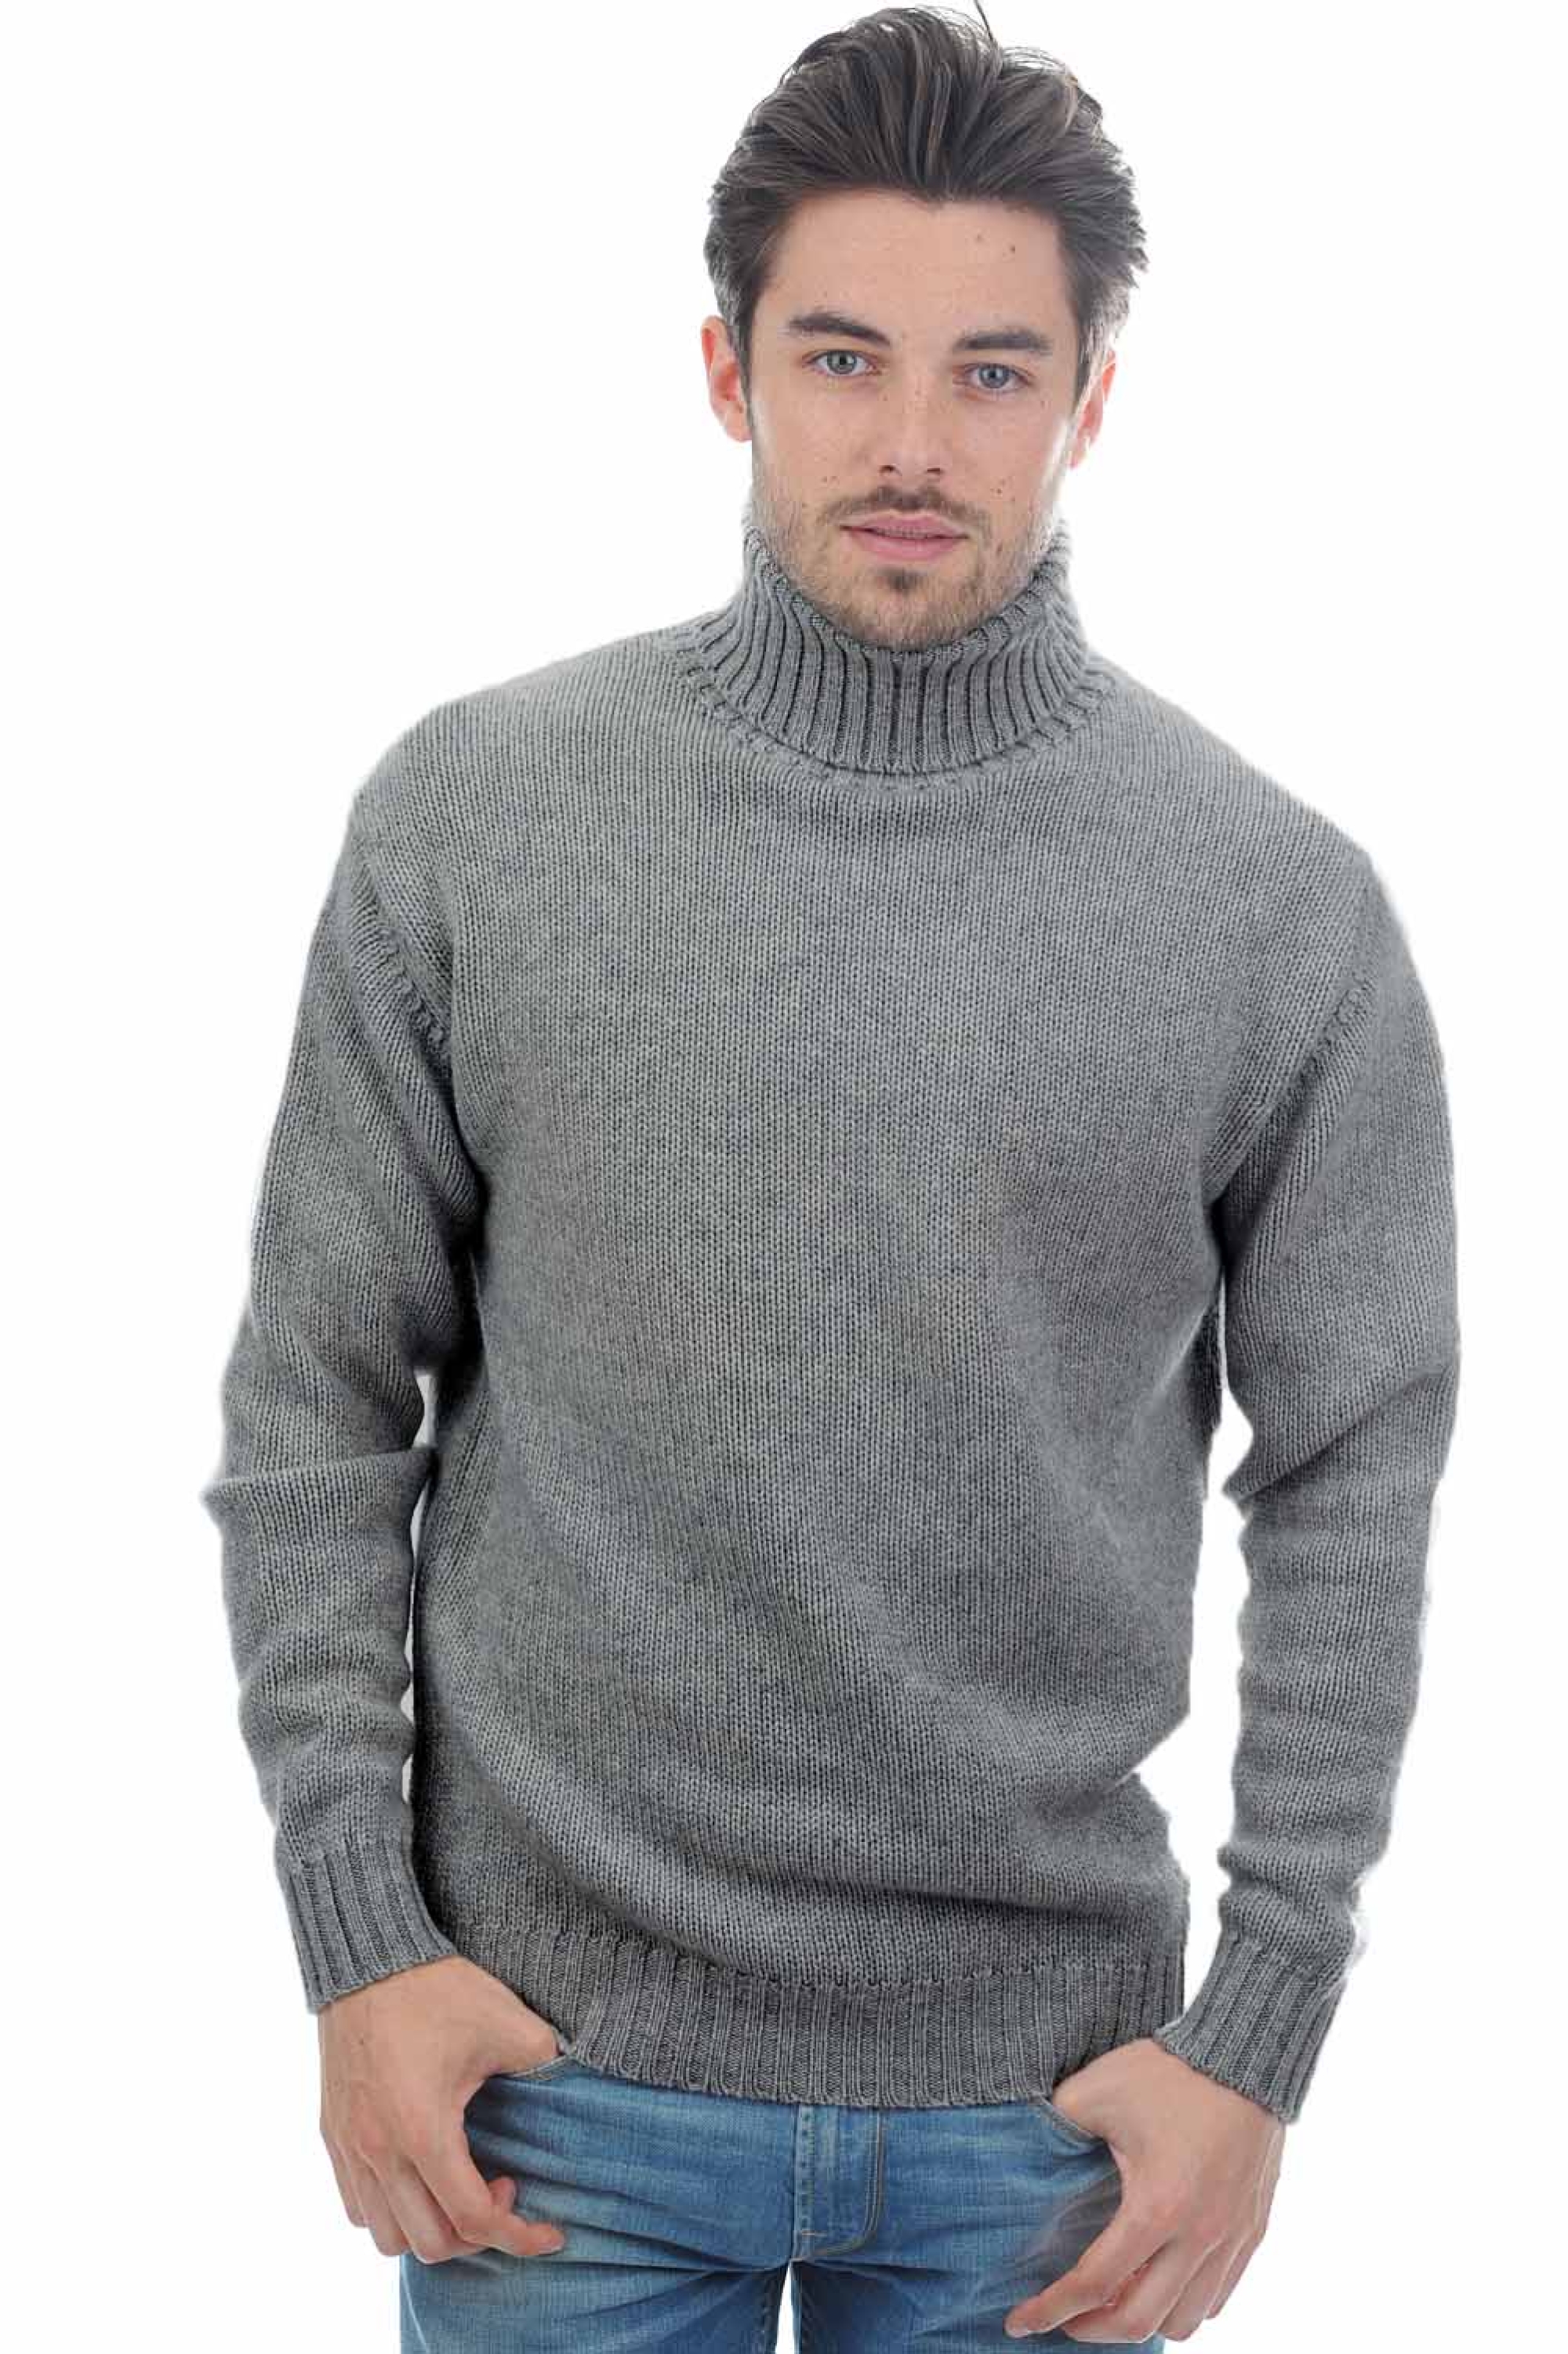 Cashmere men chunky sweater achille grey marl 3xl